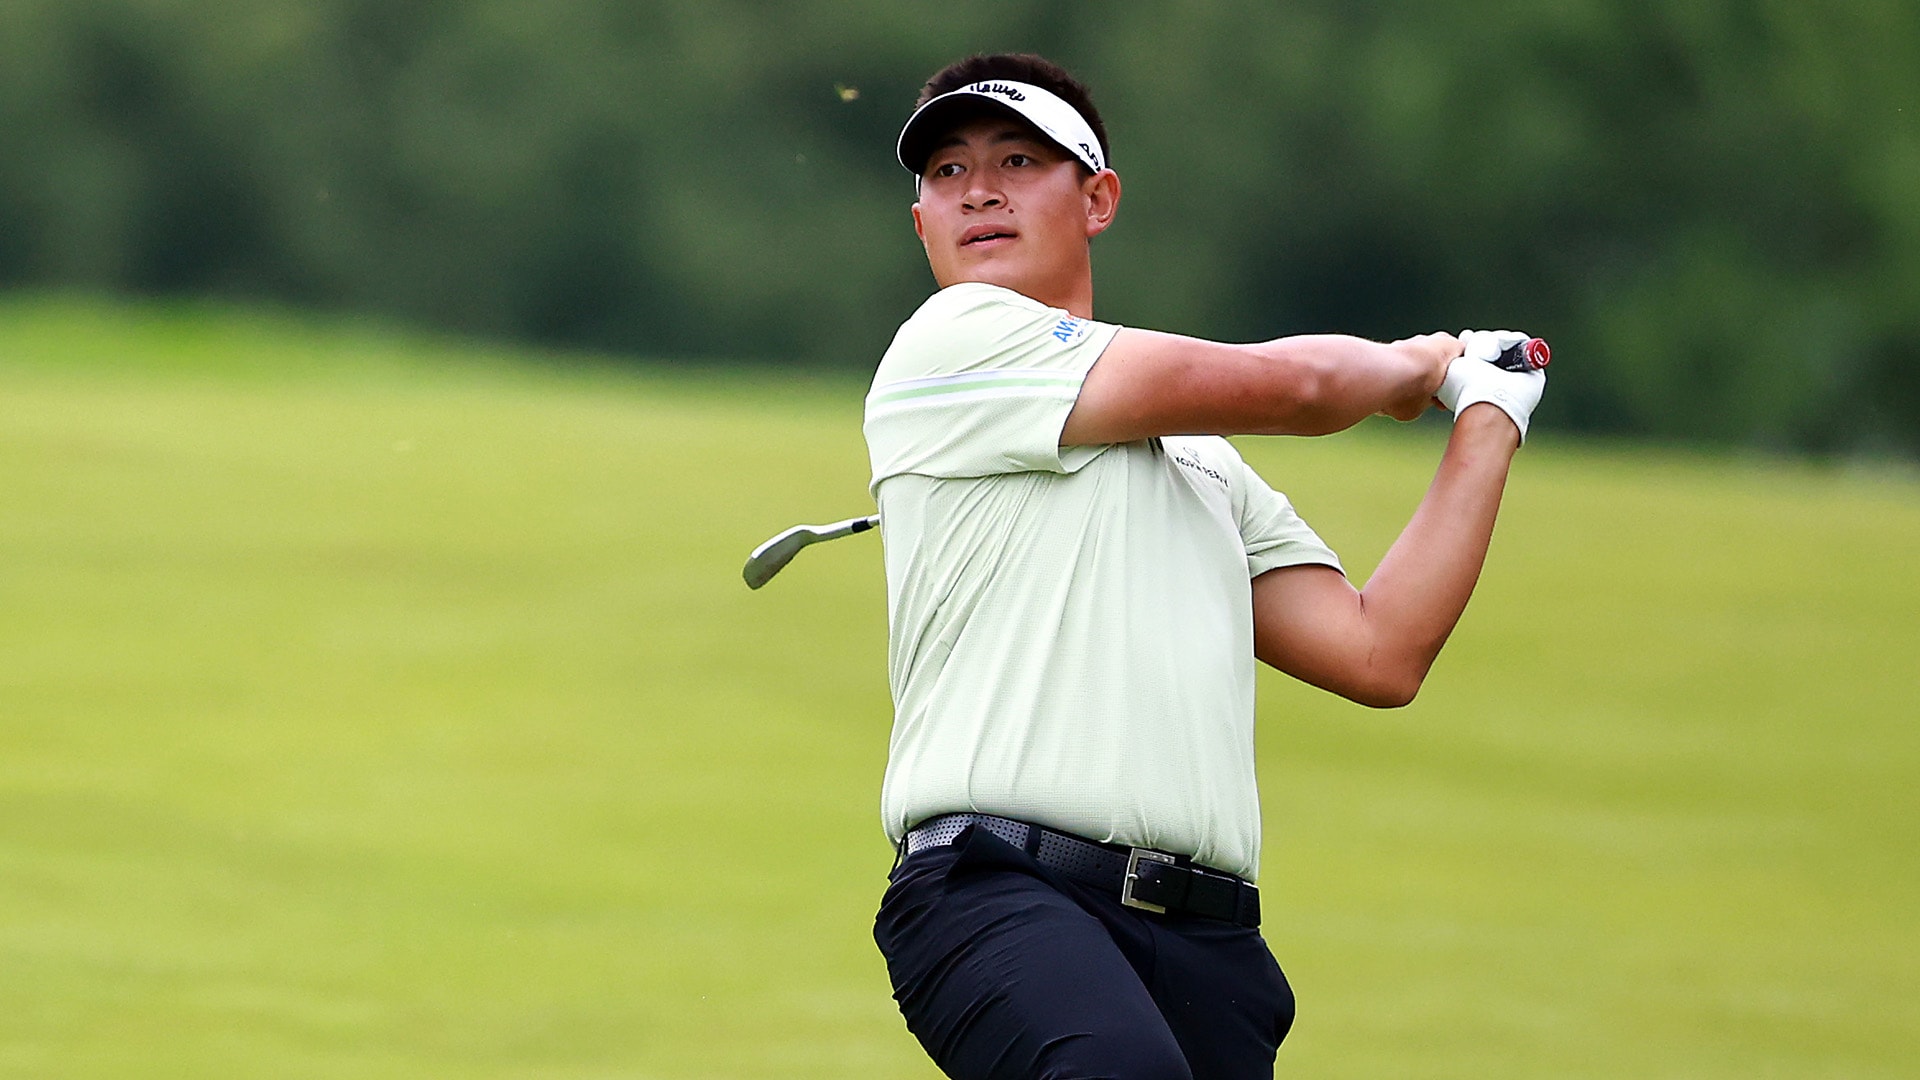 PGA Tour rookie Carl Yuan leads RBC Canadian Open; Rory McIlroy in hunt